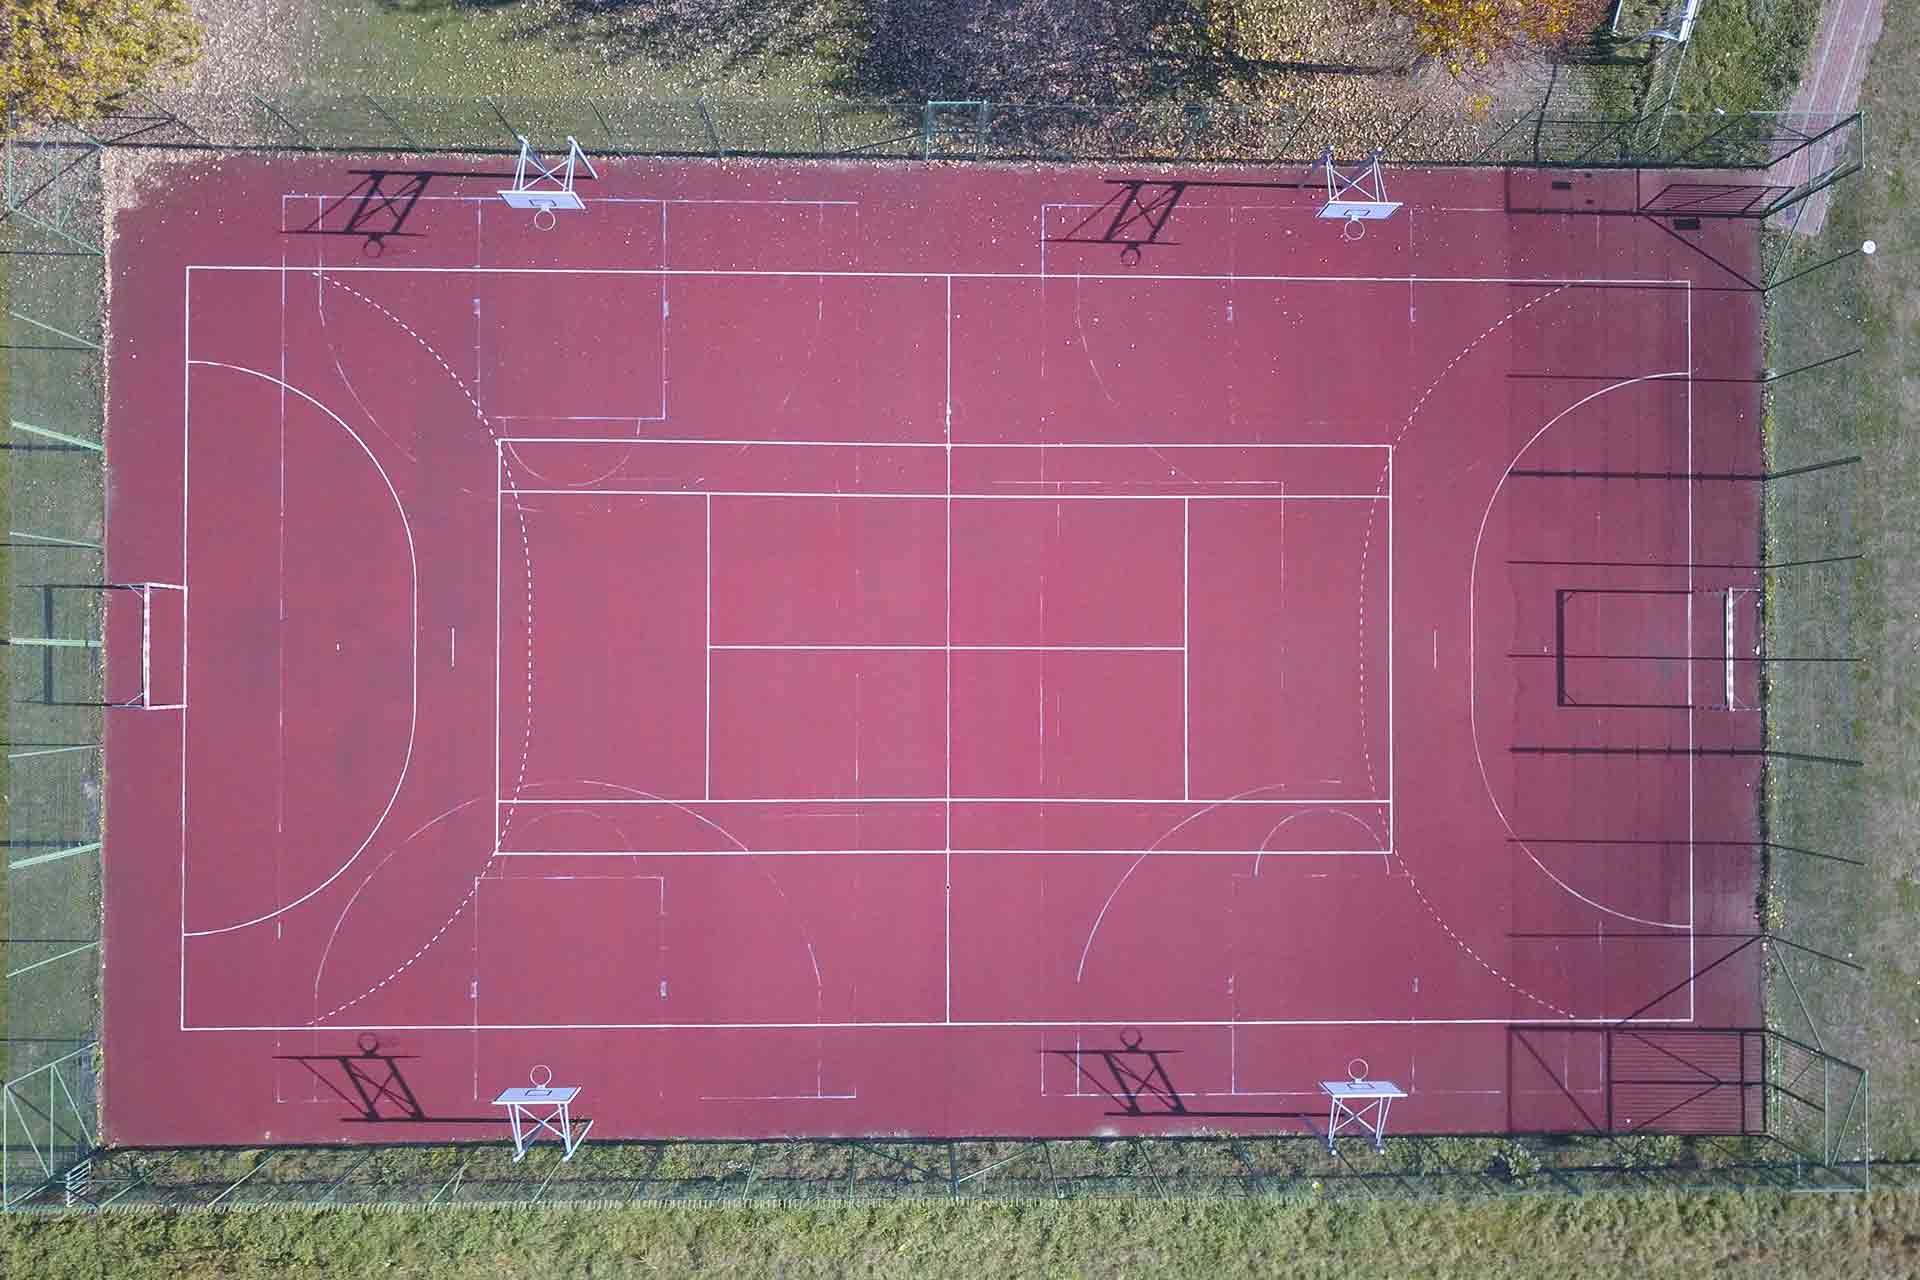 Indoor Basketball Court Costs - 2023 Prices - HomeGuide